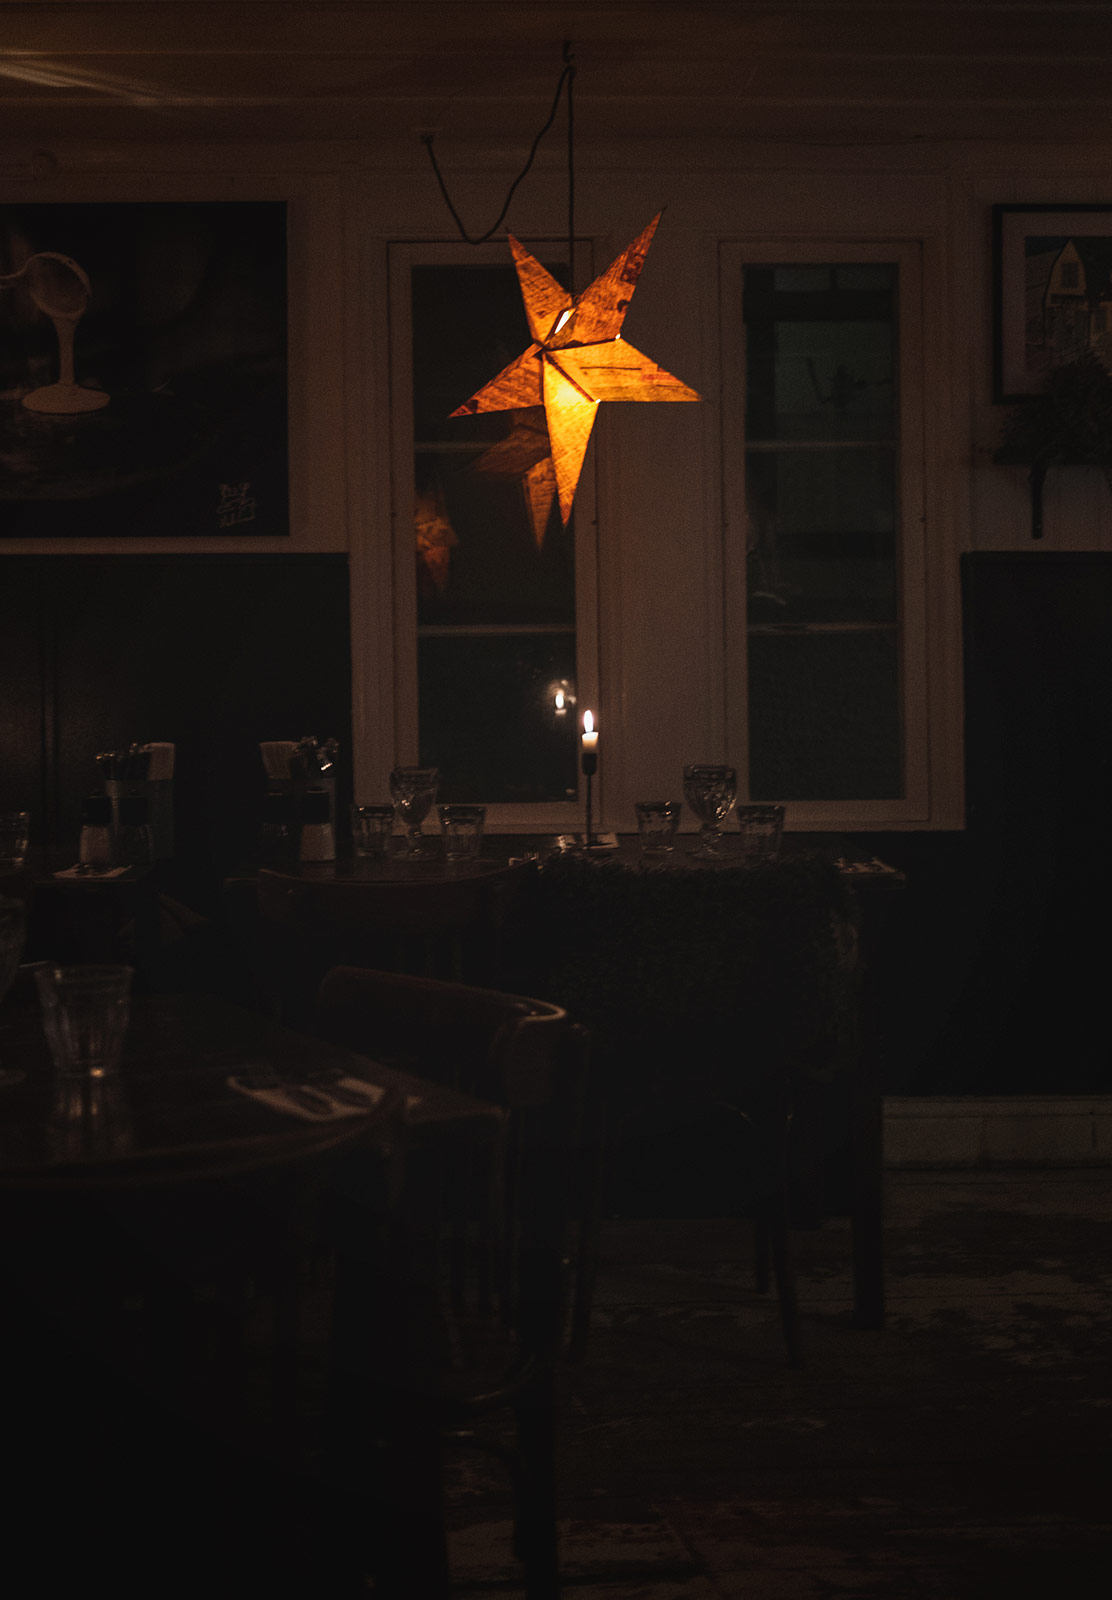 Paper star hanging over table